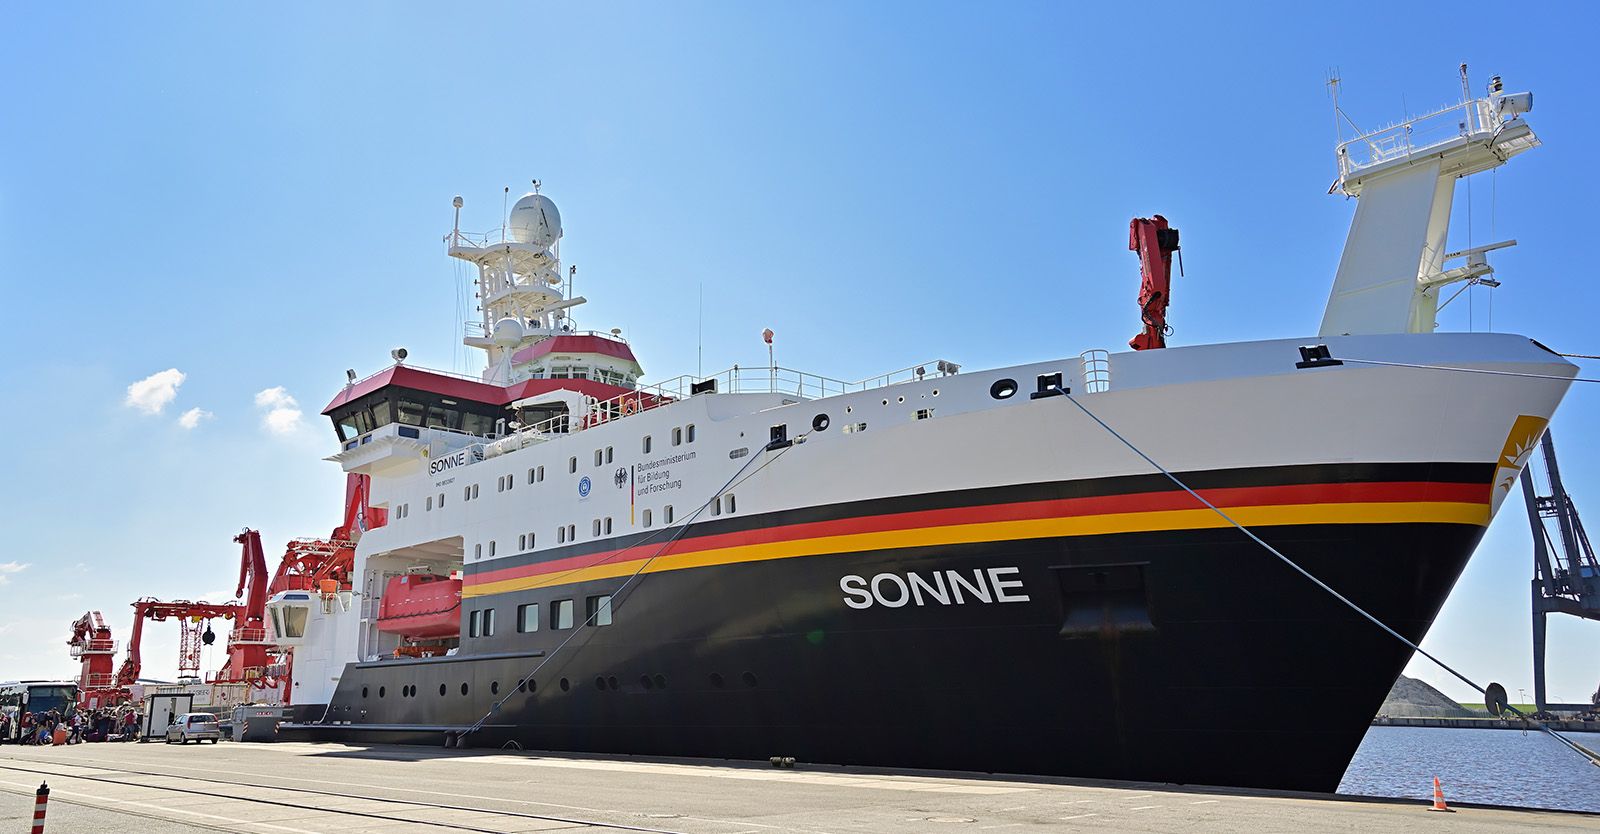 The research vessel SONNE.